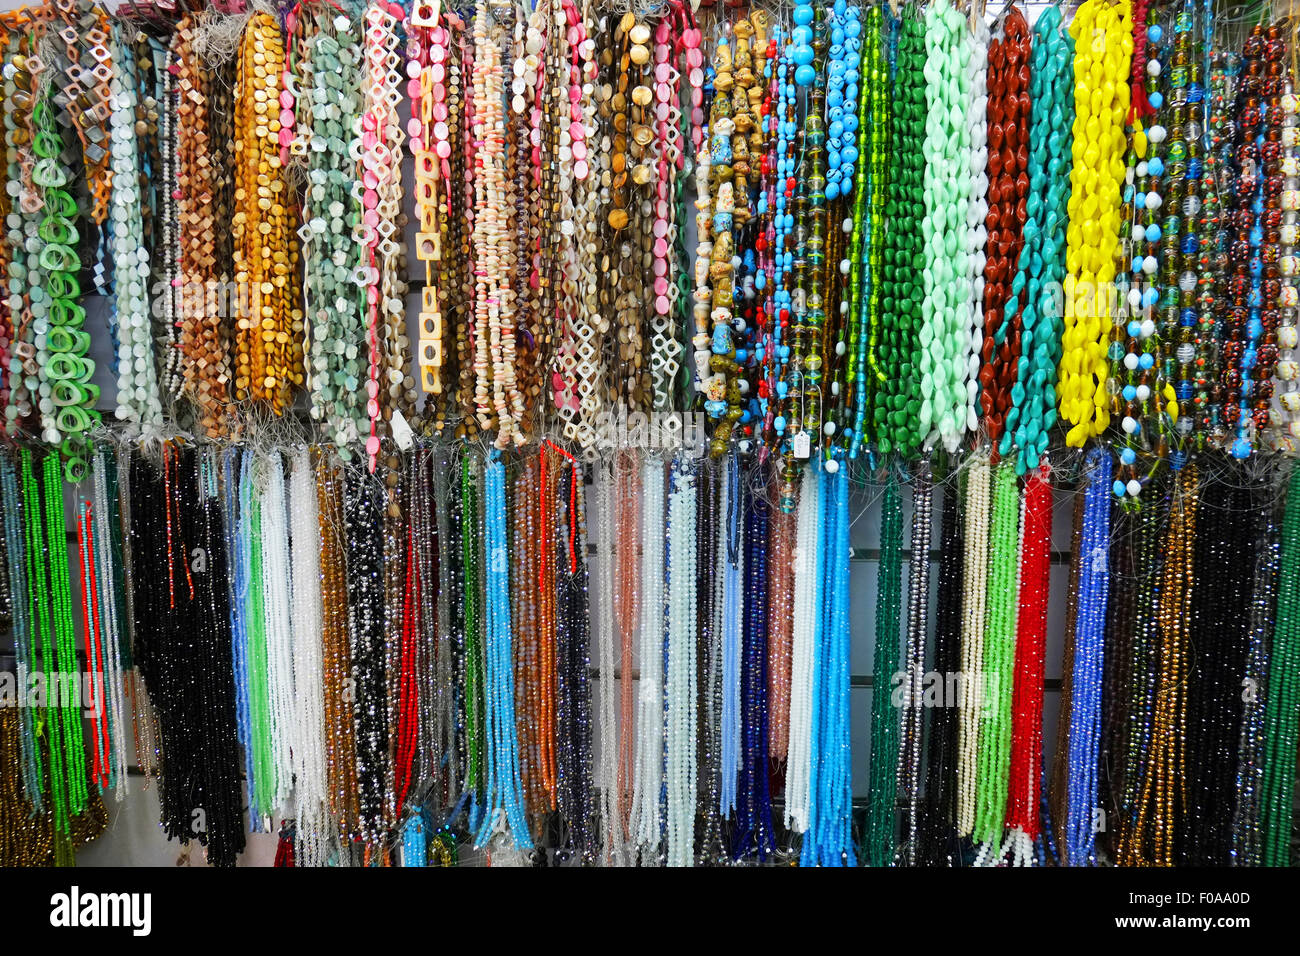 COLOURFUL BEAD NECKLACES IN SHOP Stock Photo